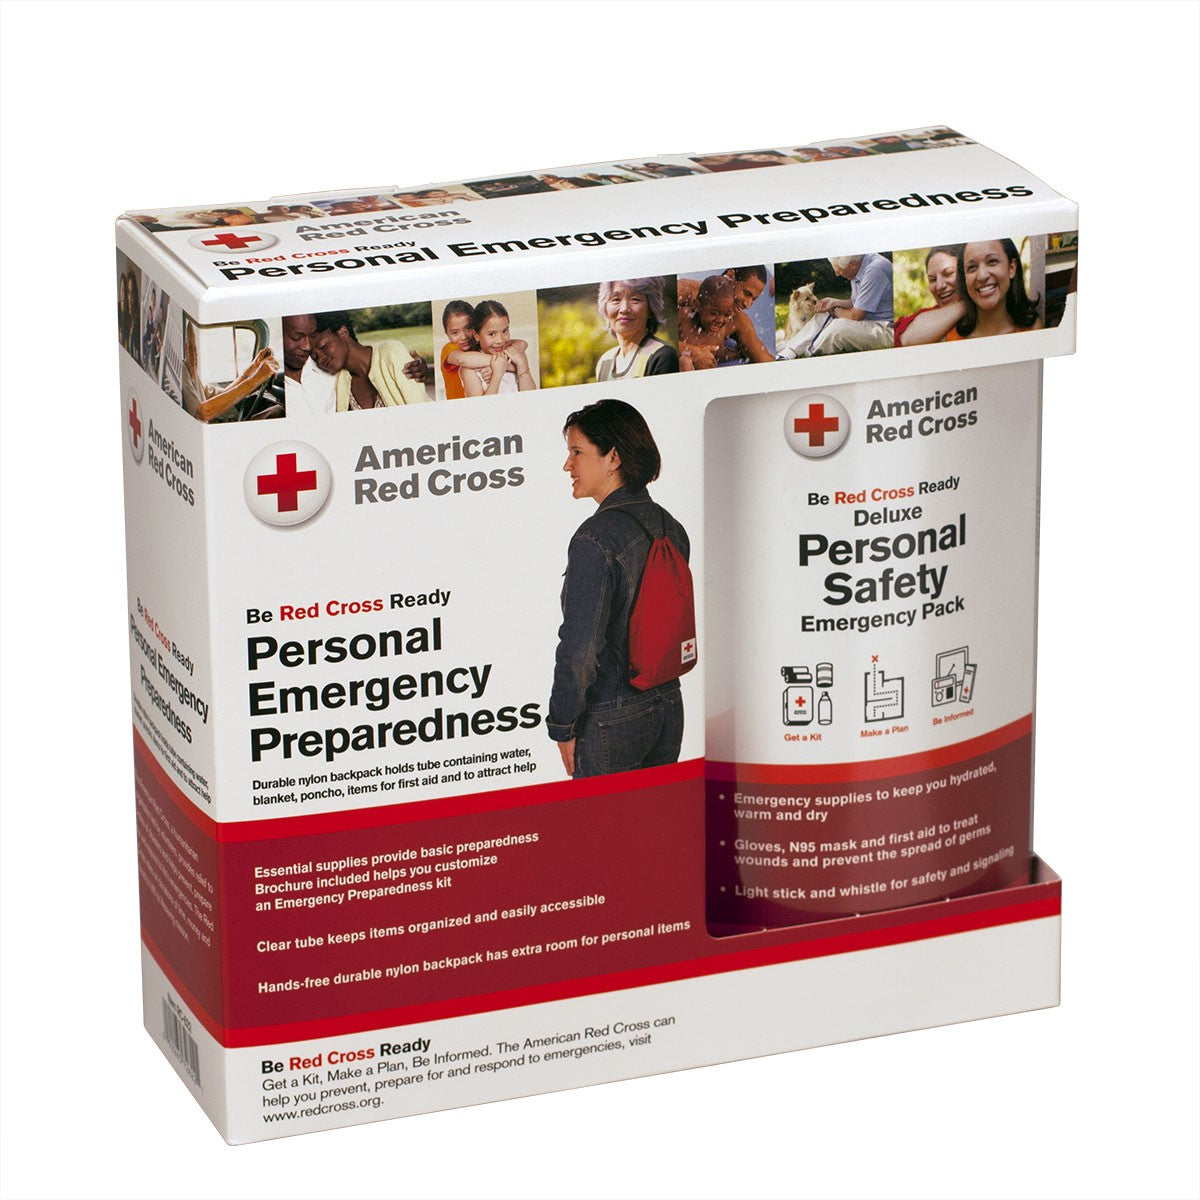 American Red Cross Deluxe Personal Safety Emergency Pack - W-RC-622